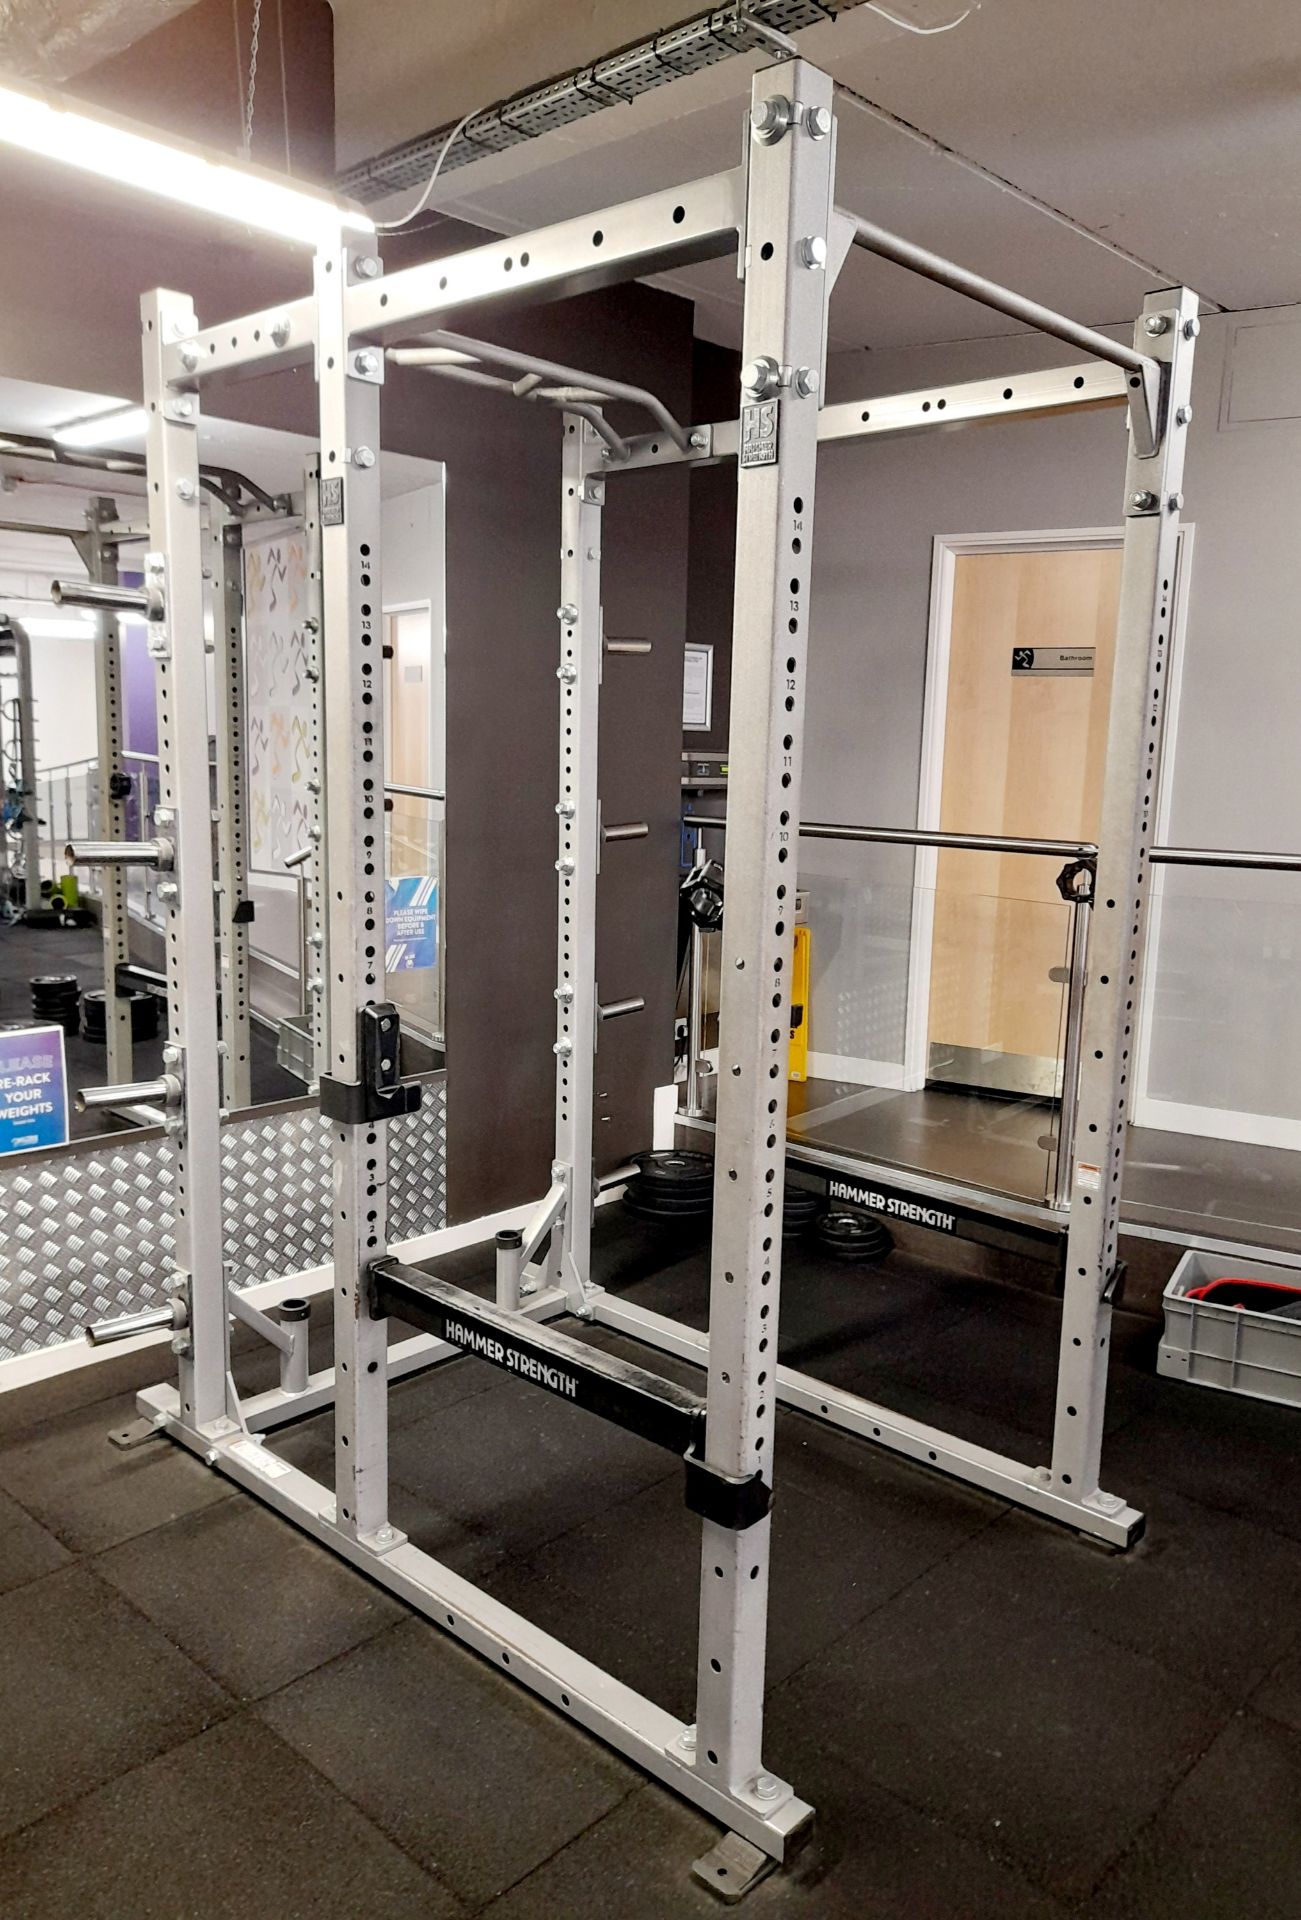 Hammer Strength Power Rack. This auction contains a COMPOSITE LOT made up of Lots 1 to 50 inclusive